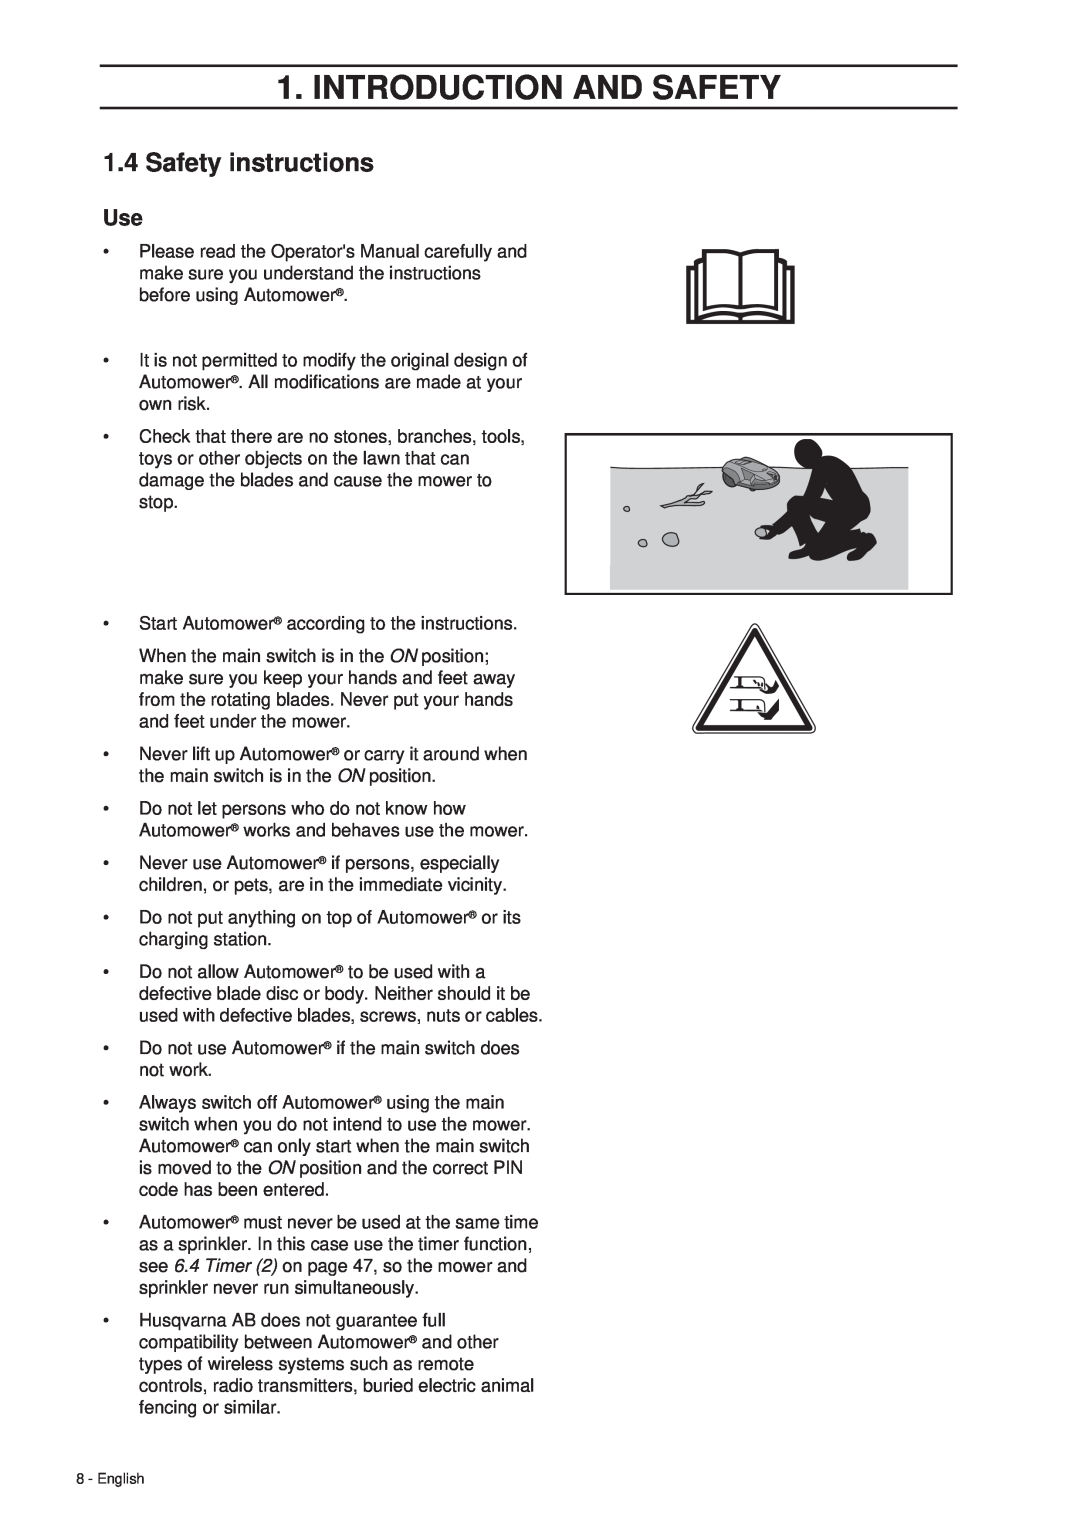 Husqvarna 260 ACX manual 1.4Safety instructions, Introduction And Safety 